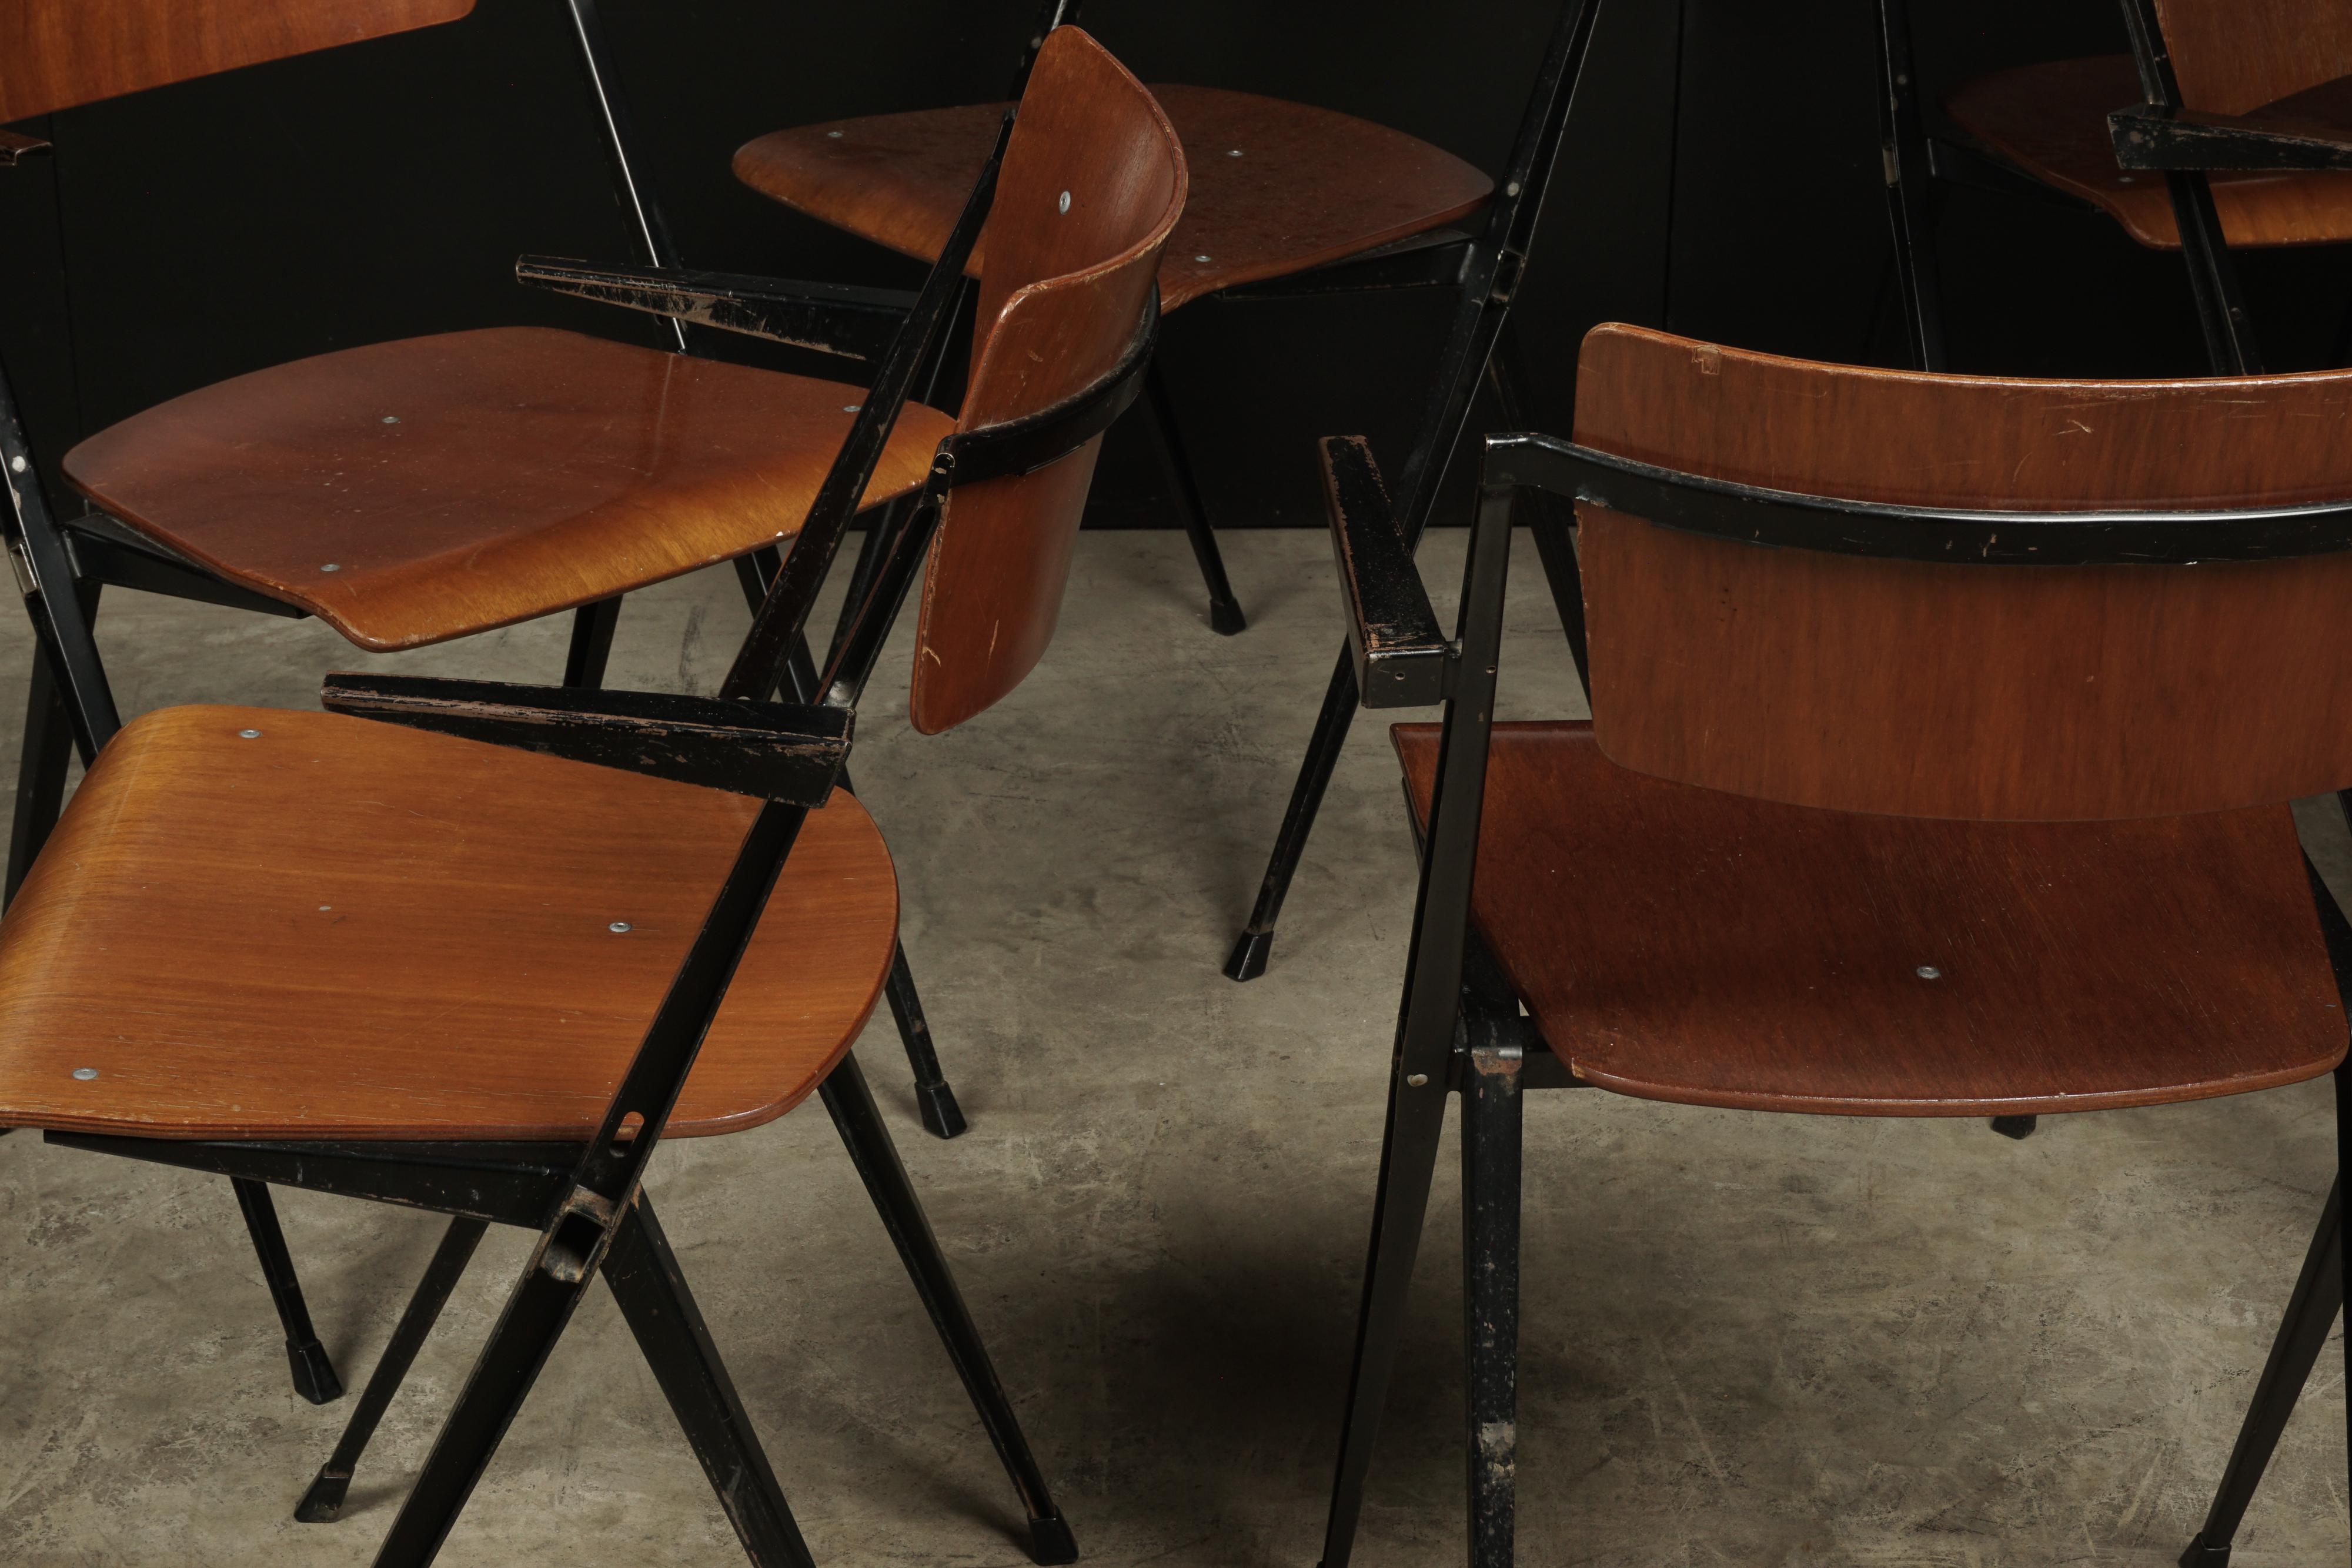 Rare Set of Six Stacking Chairs Designed by Wm. Rietveld, circa 1960 In Good Condition For Sale In Nashville, TN